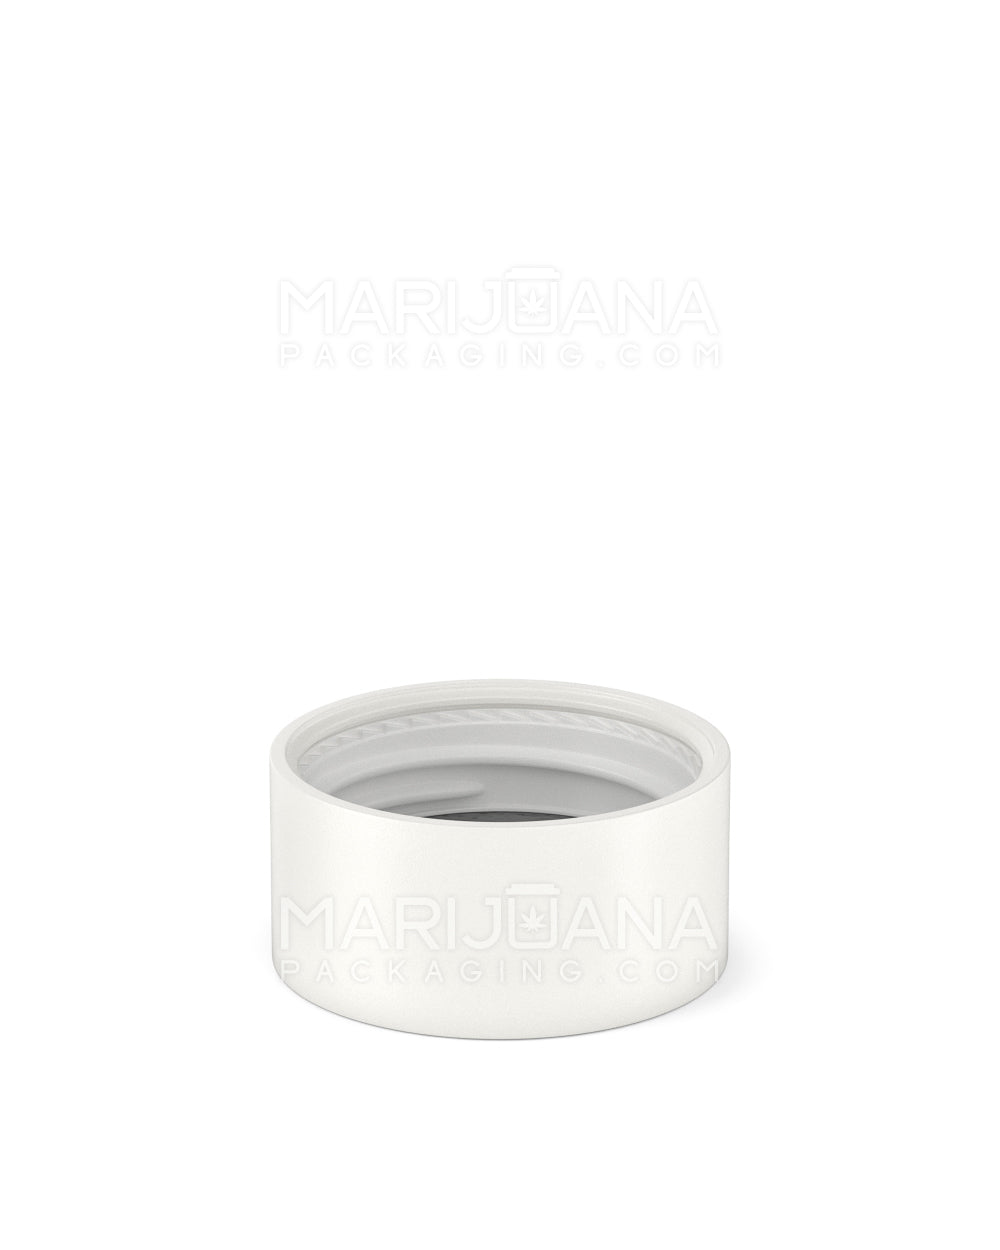 POLLEN GEAR | HiLine Child Resistant Smooth Push Down & Turn Plastic Scooped Caps w/ Foil Liner | 28mm - Matte White - 308 Count - 4